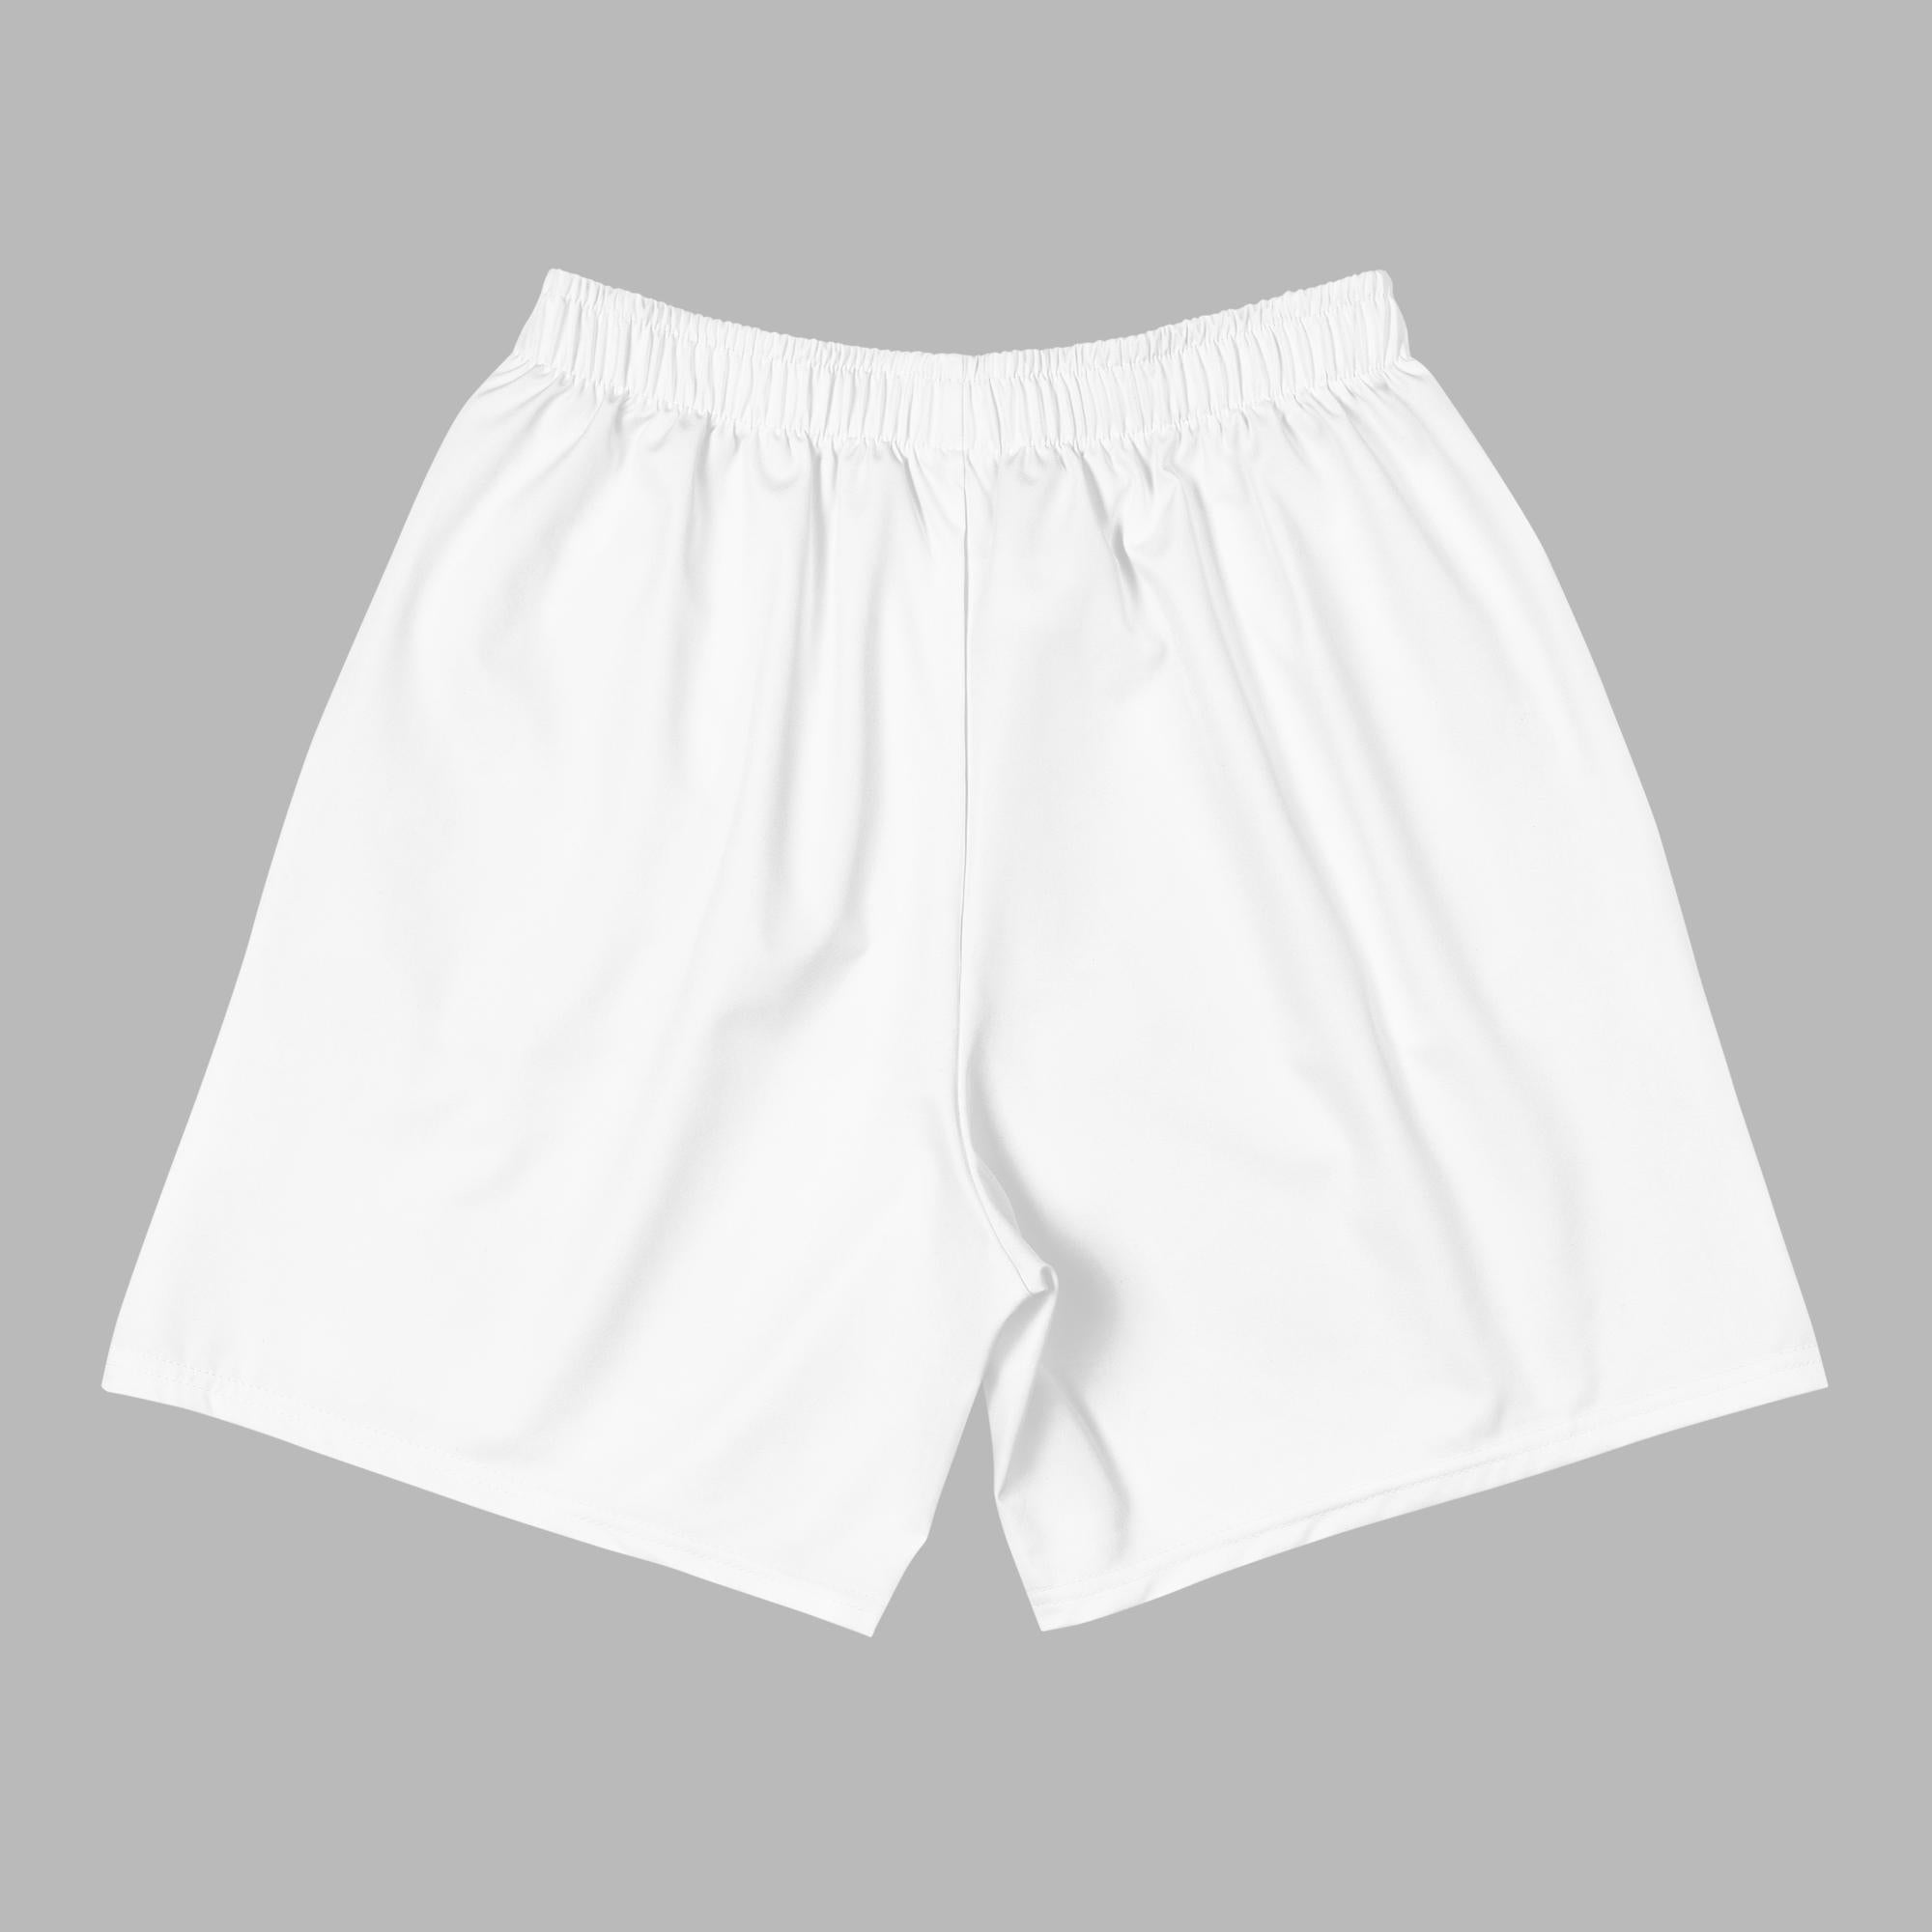 Men's Recycled Athletic Shorts - White